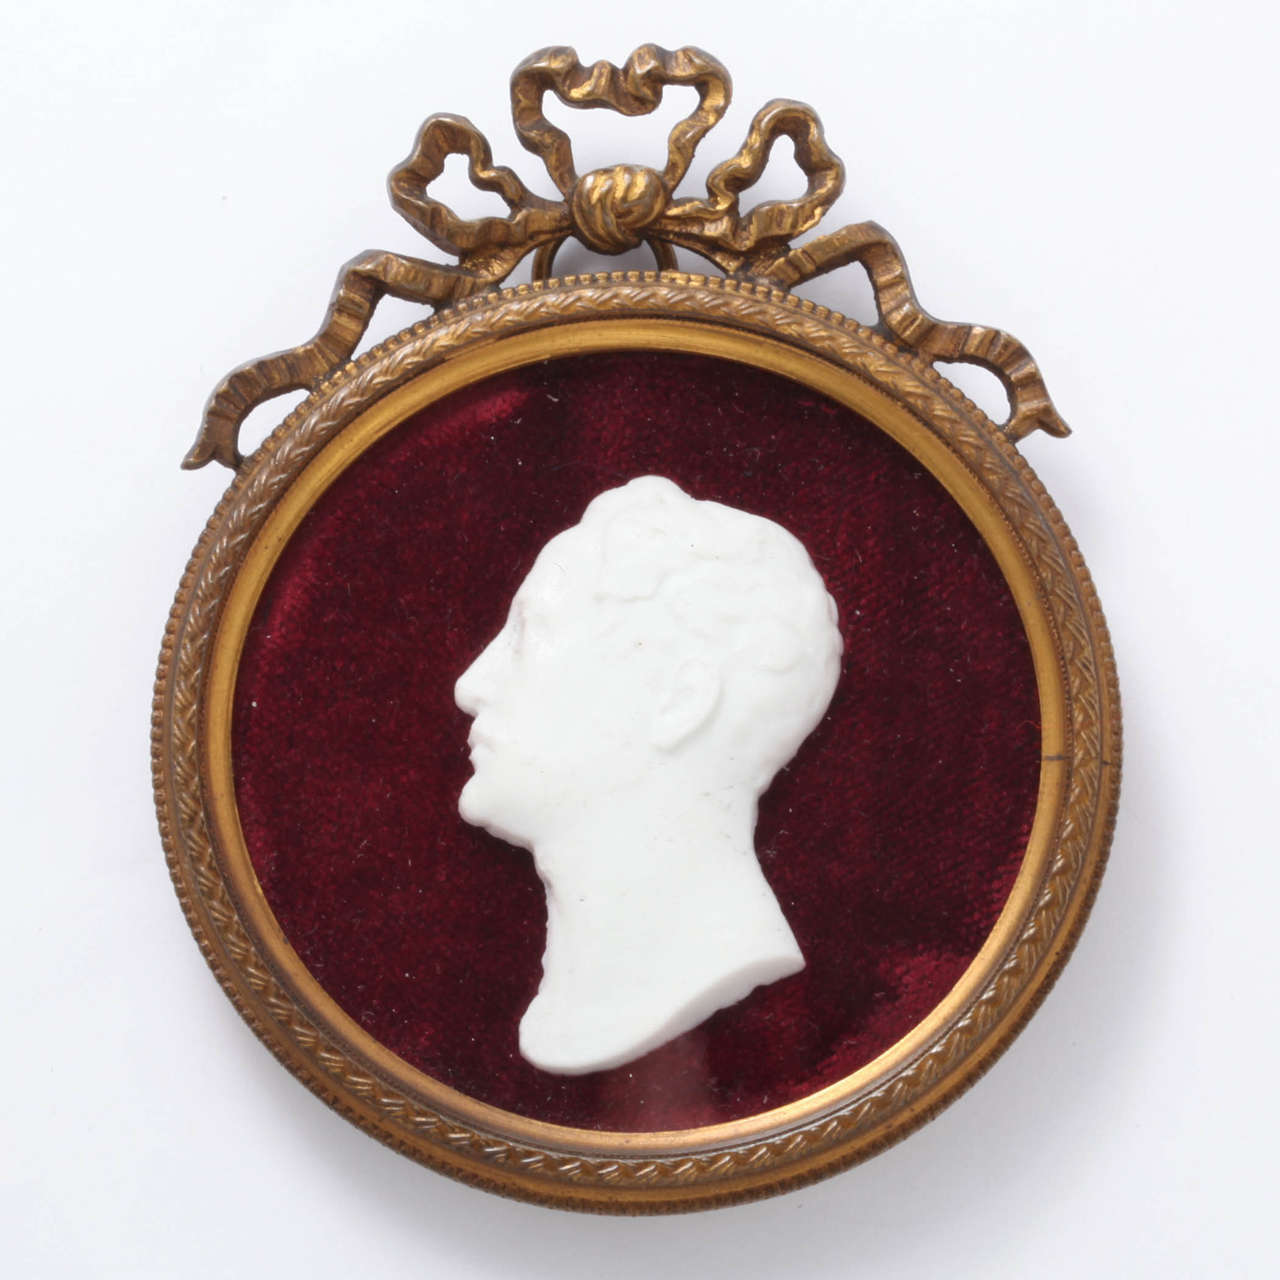 Depicting the Russian emperor, Tsar Nicholas I (r 1825-55) in profile within a 19th century neoclassical style bronze circular frame.

French, 1825-55.

3 3/8 in. (8.5 cm.) long including bow.